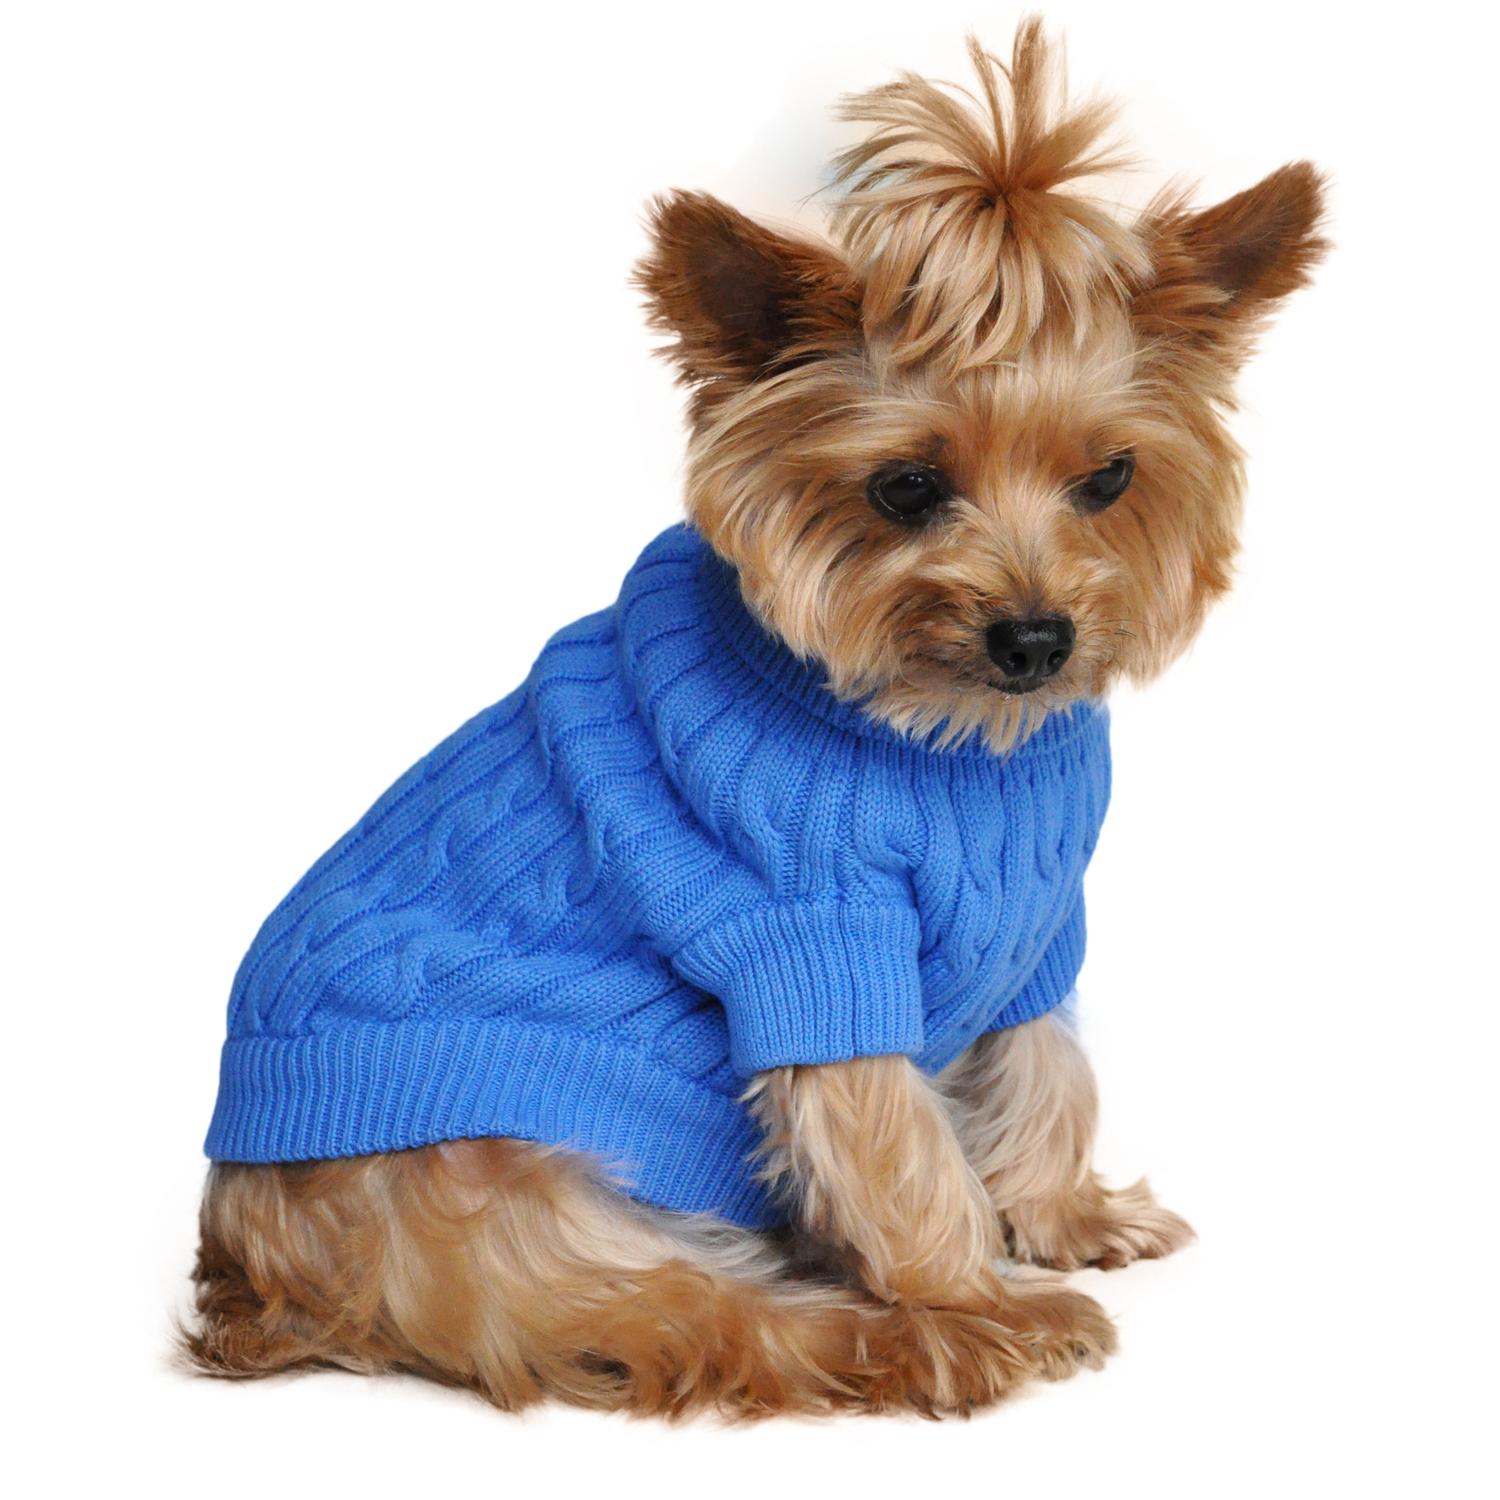 Cable Knit Dog Sweater by Doggie Design - Riverside Blue